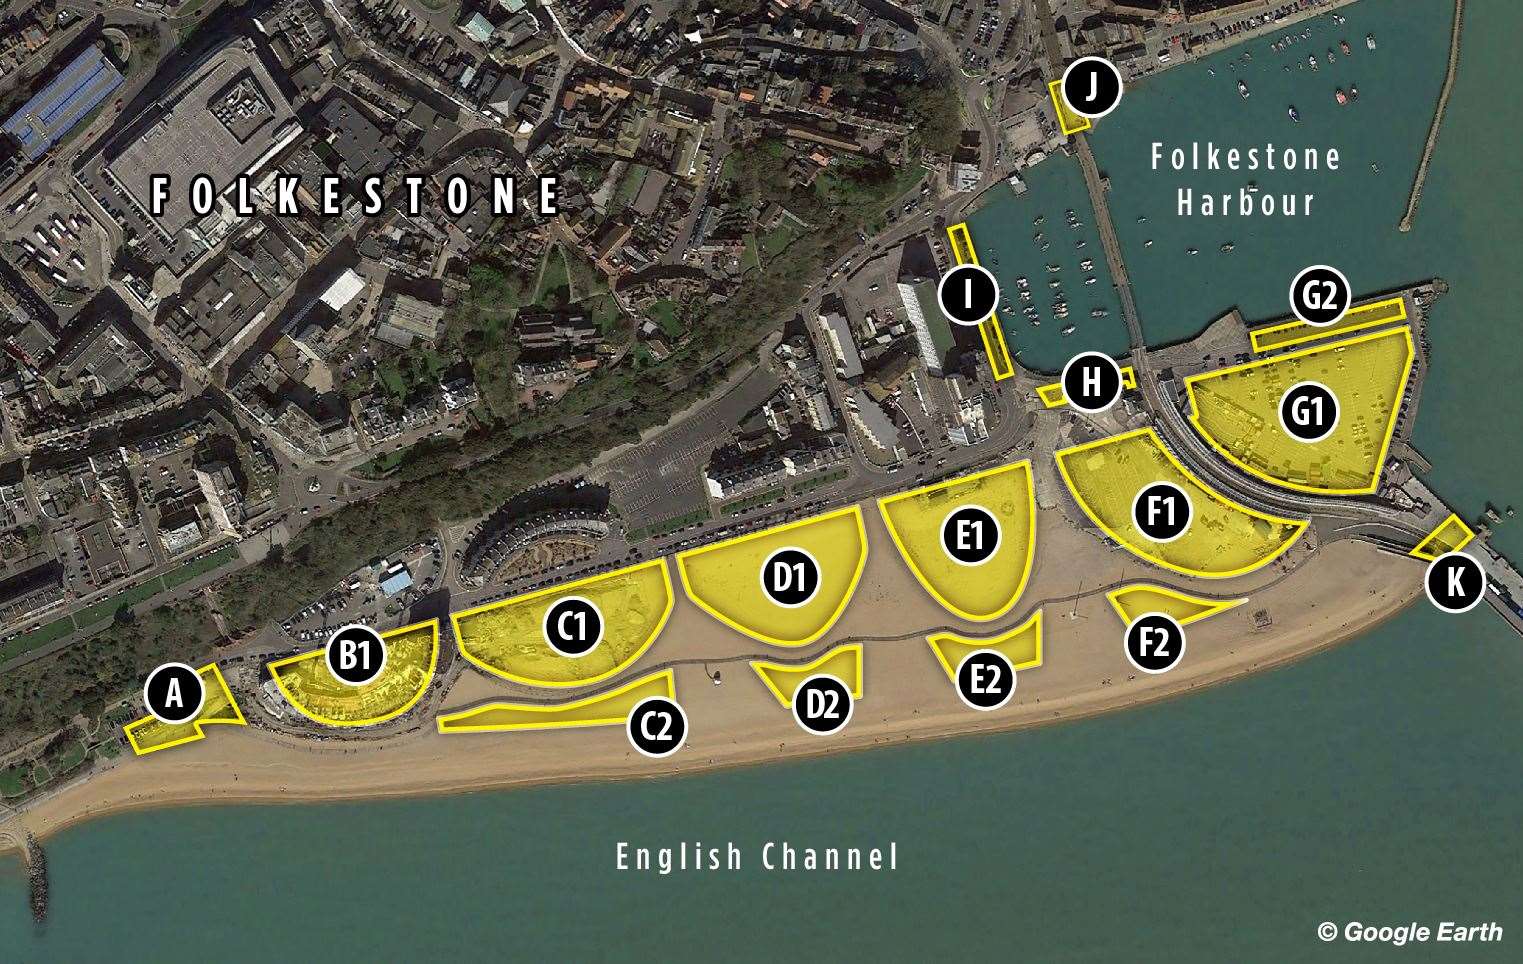 The individual plots identified as part of the masterplan for the redevelopment of Folkestone seafront and harbour